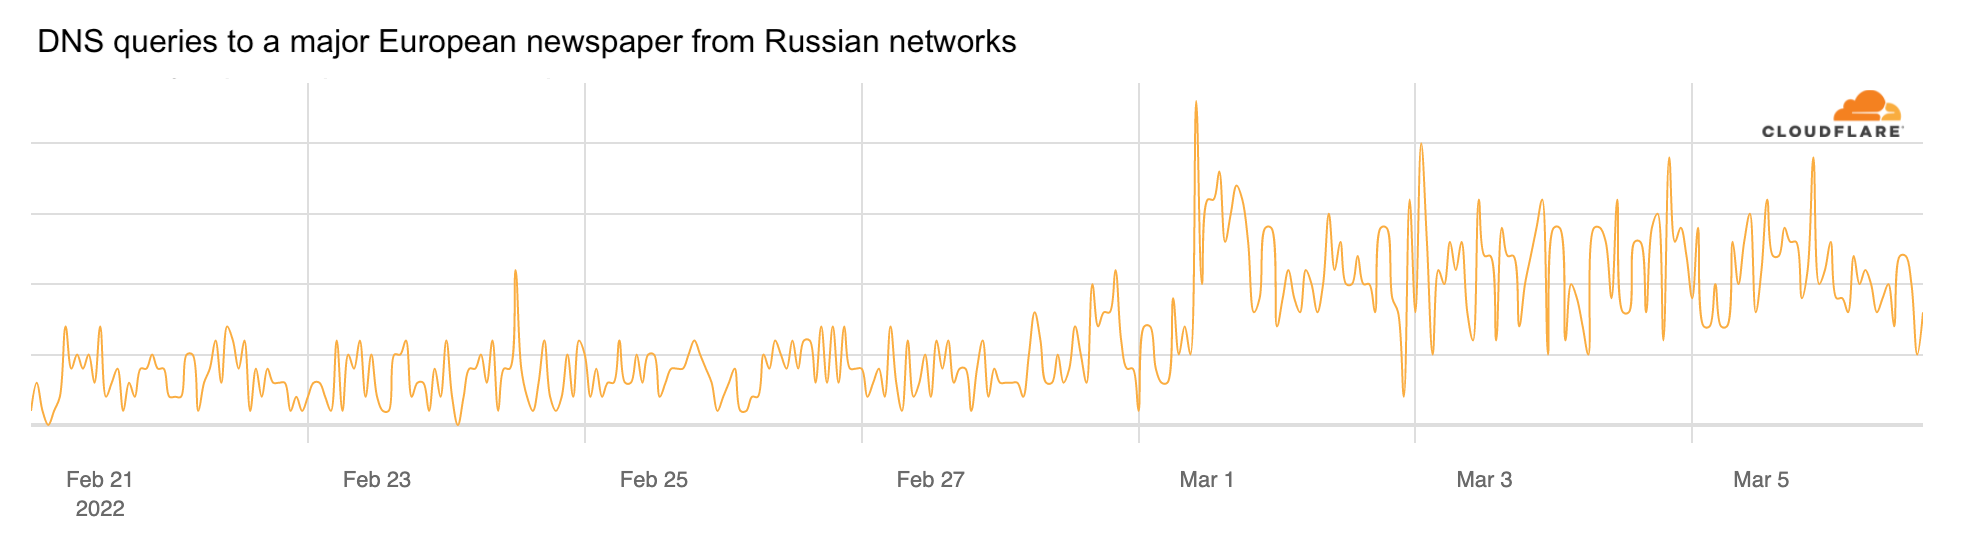 Steps we've taken around Cloudflare's services in Ukraine, Belarus, and Russia